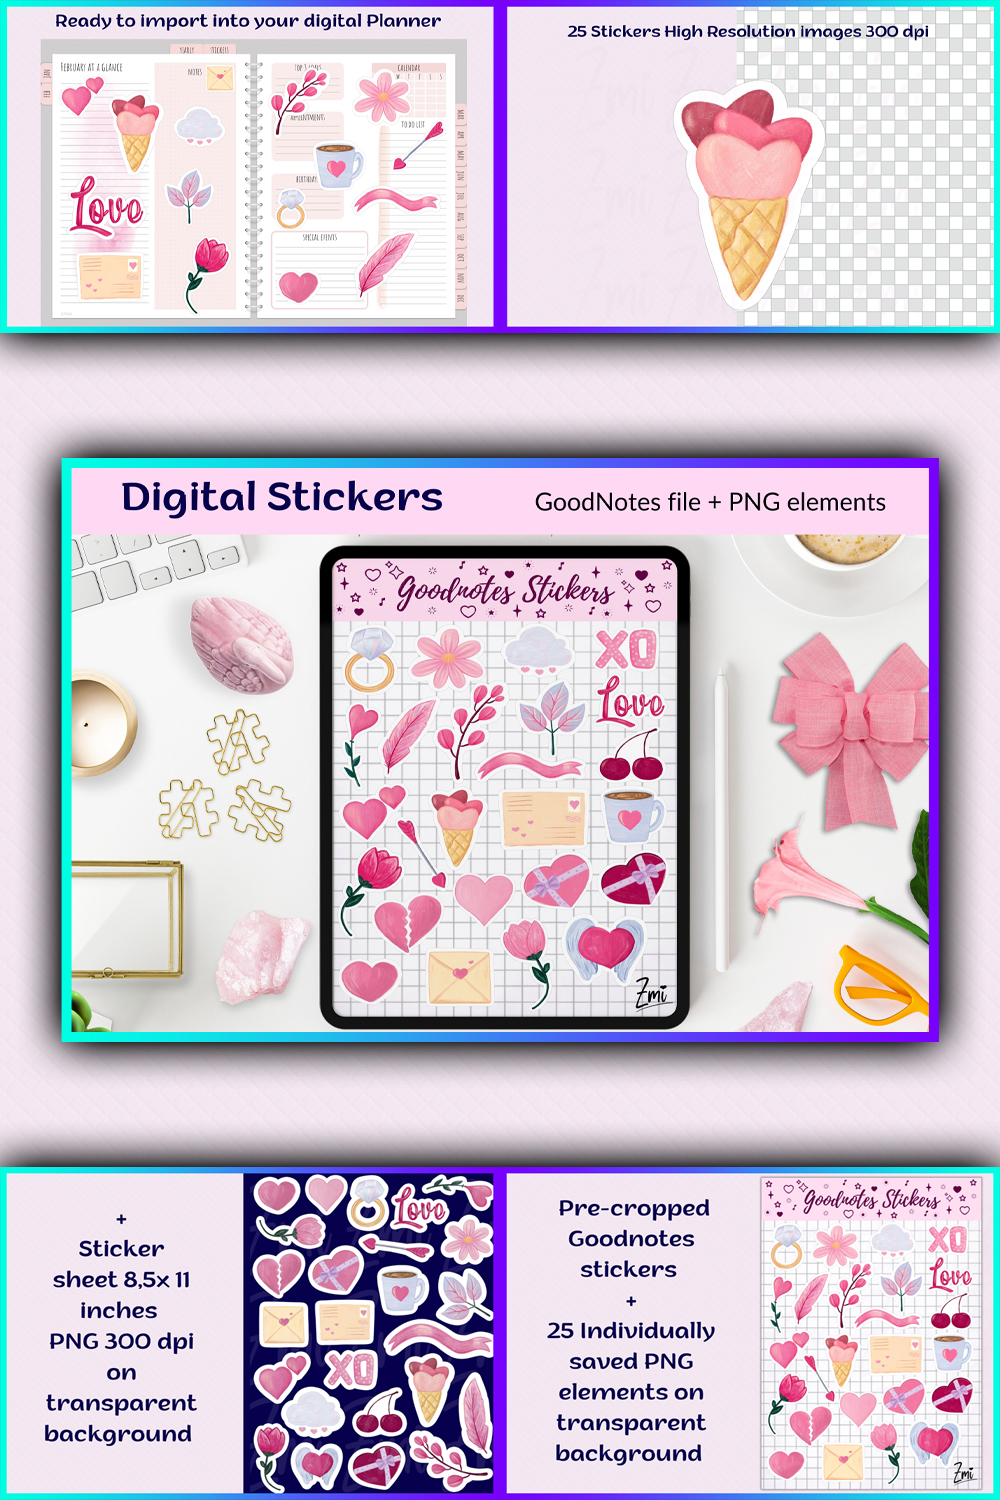 Illustrations valentine s day digital stickers pack png and good of pinterest.